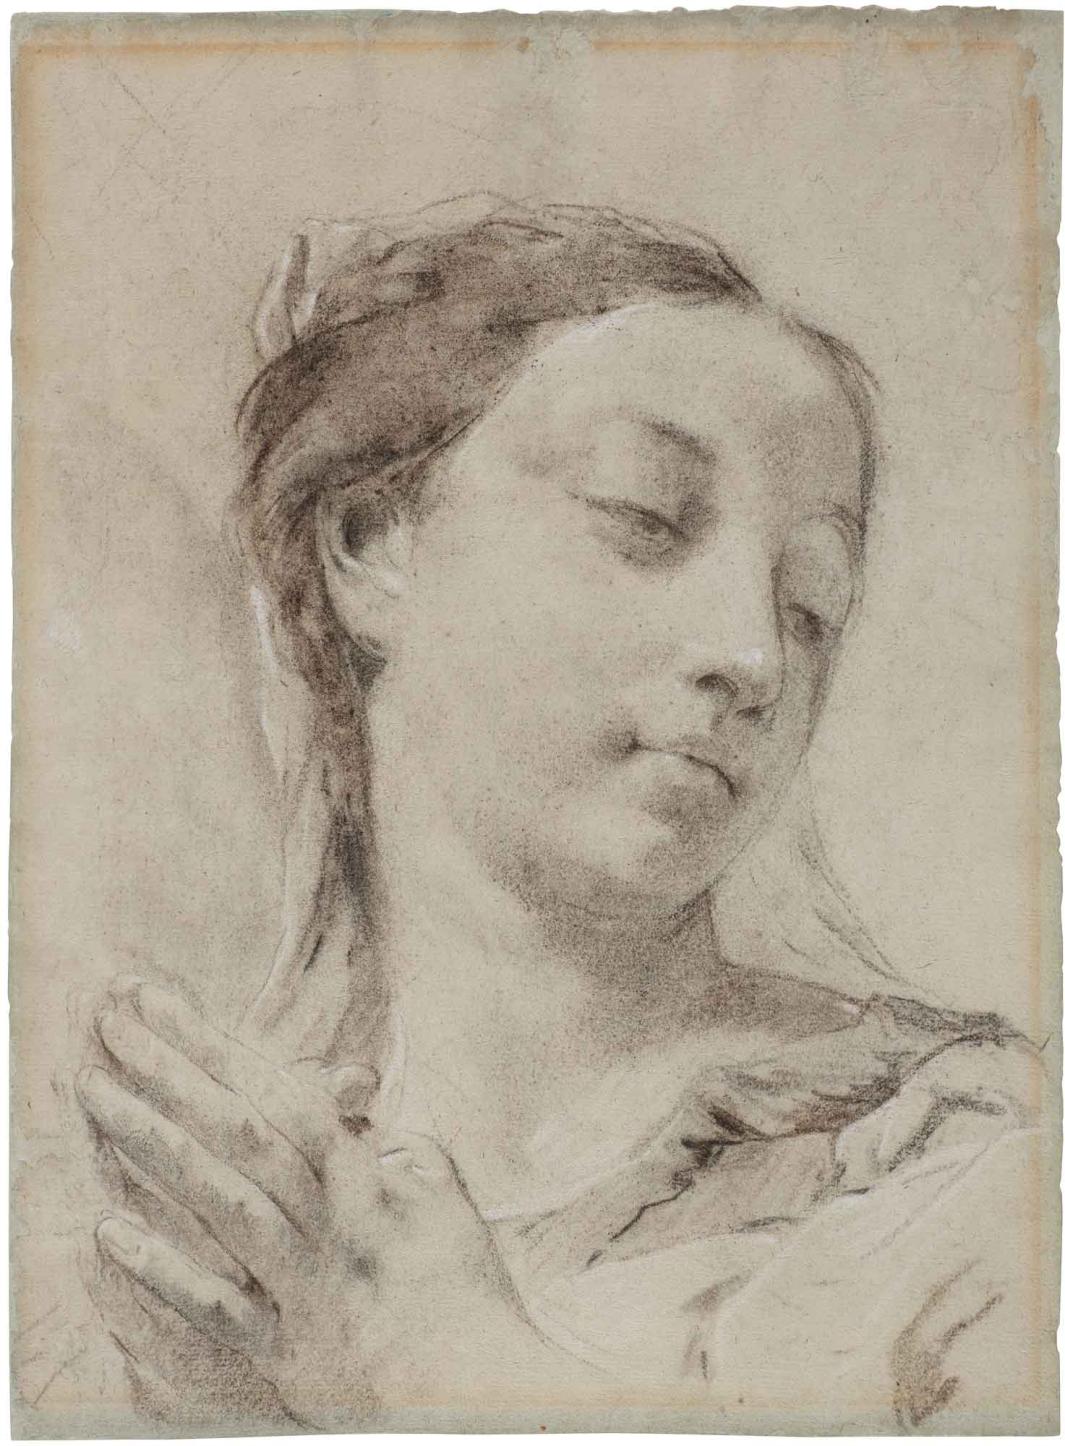 Head and shoulders of a woman in three-quarter view, looking down and to the side, with her hands clasped in front of her as in prayer